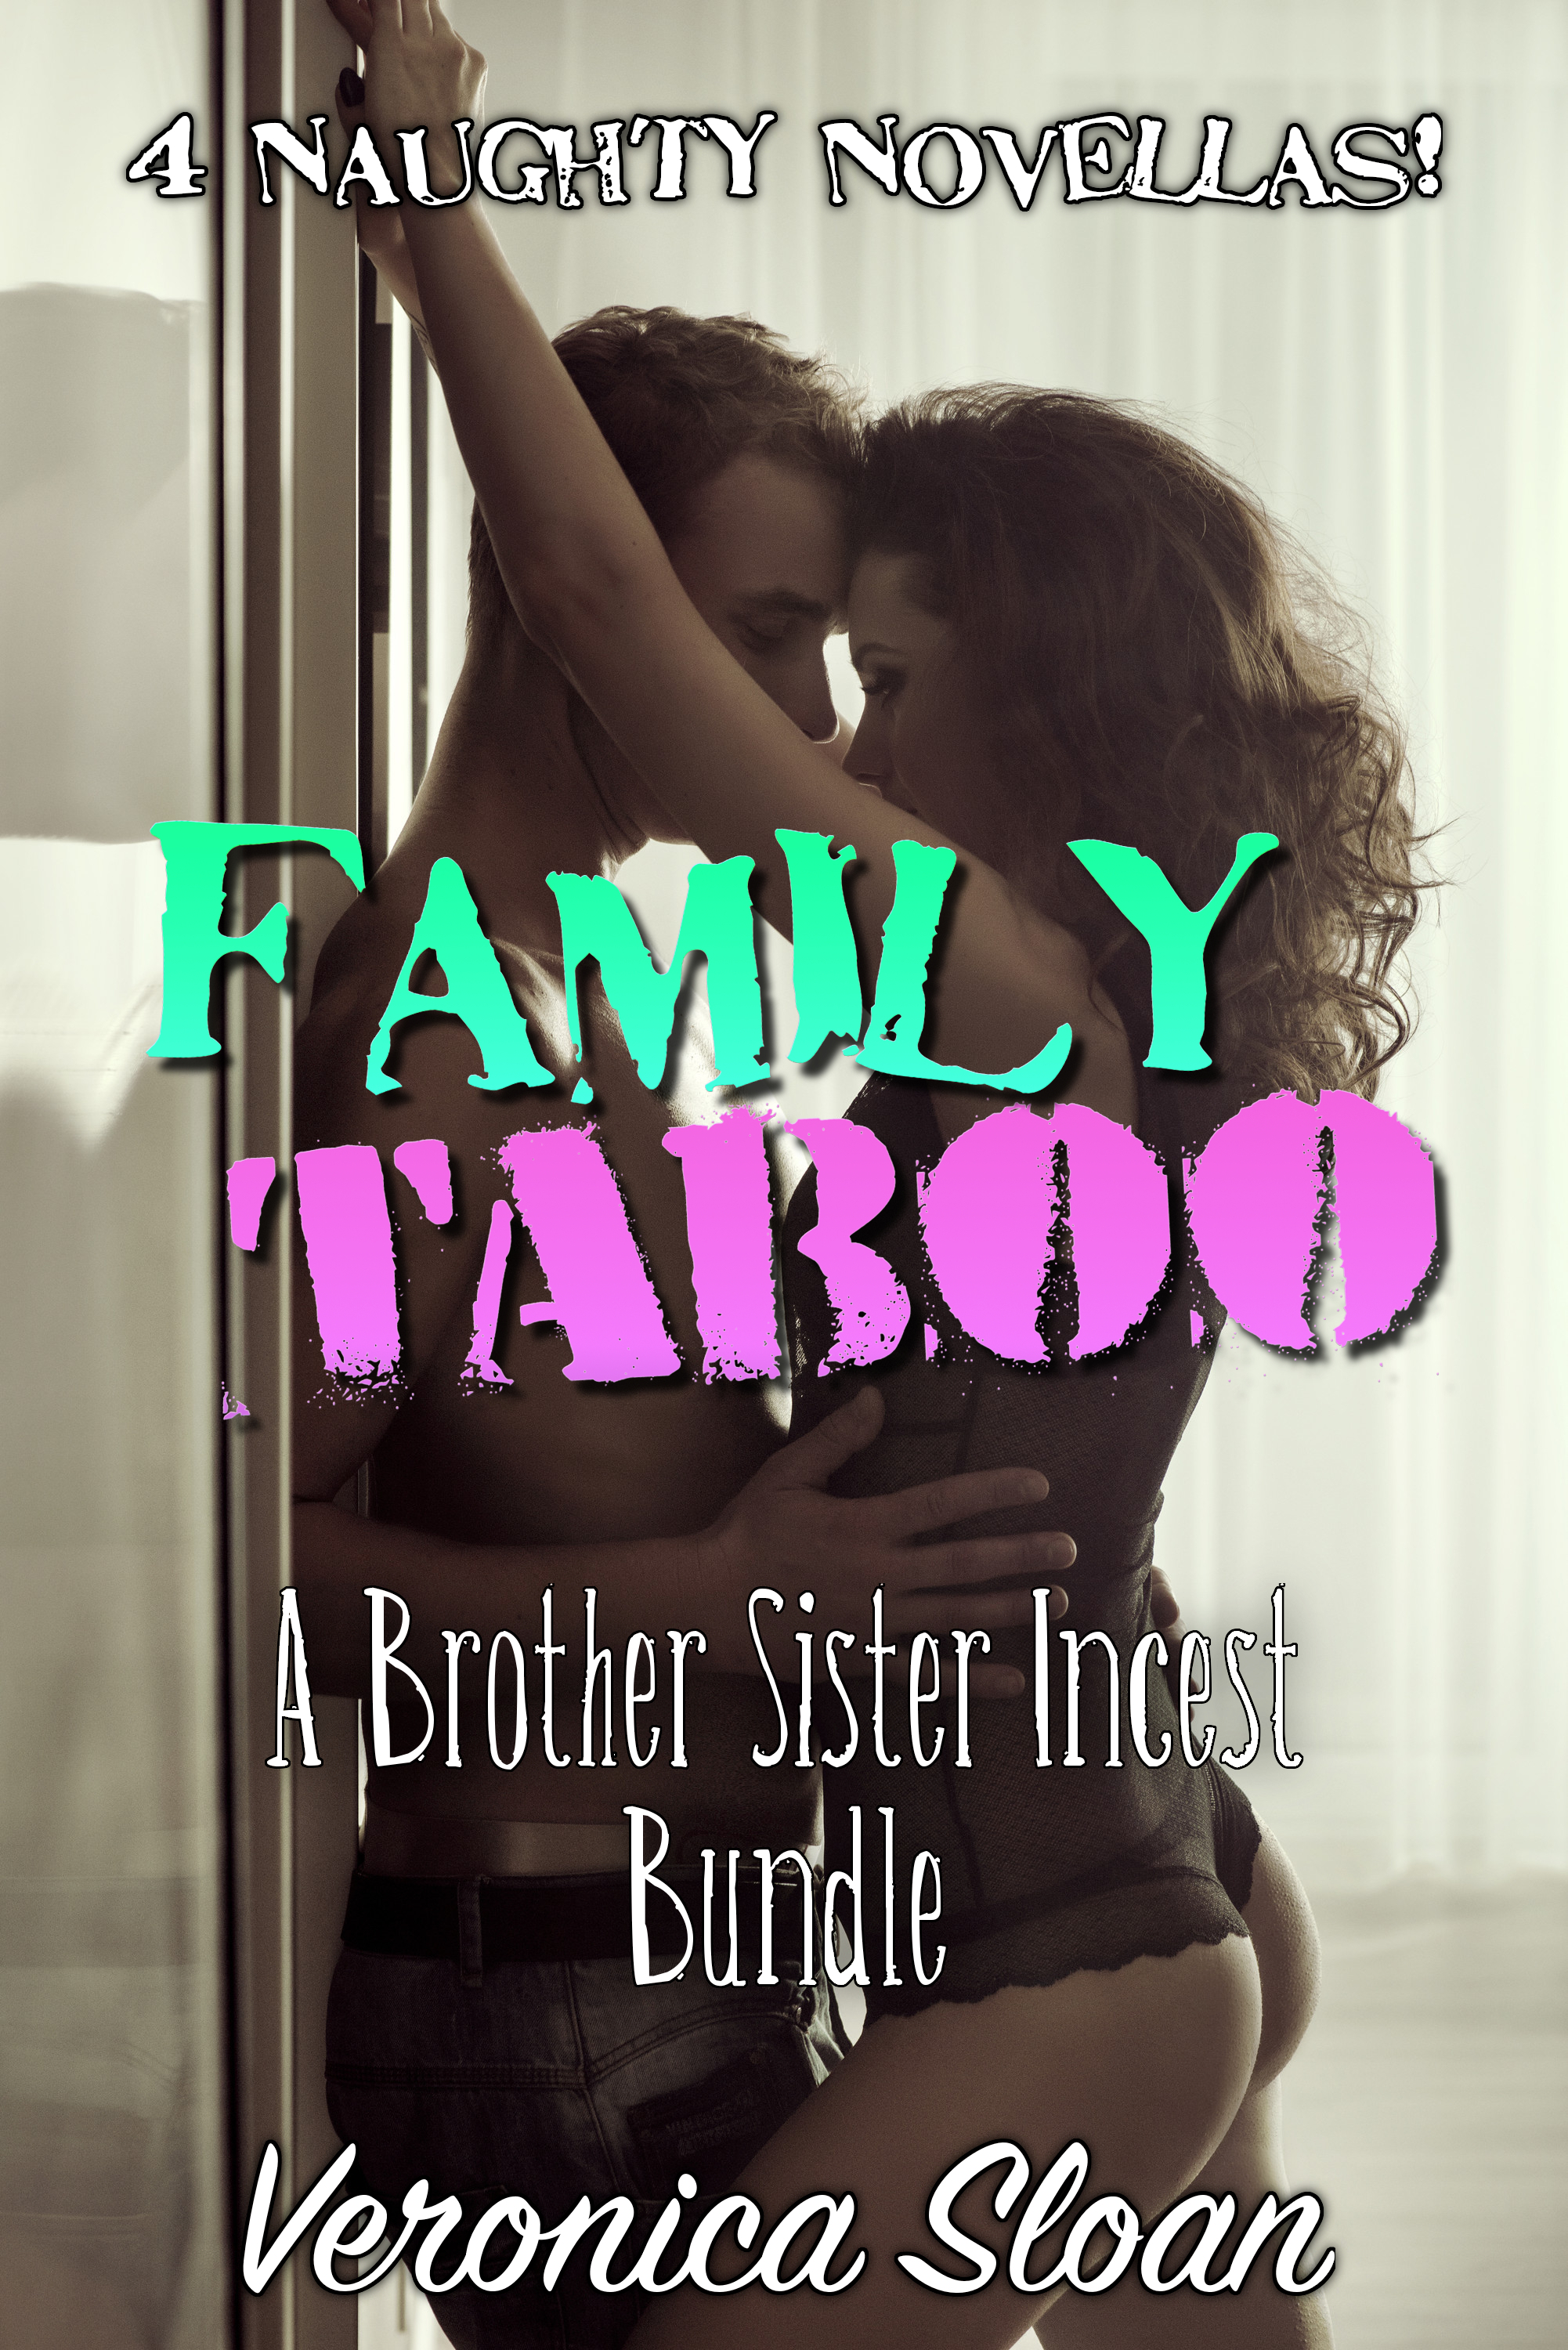 claudia savannah recommends Brother Sister Insest Stories